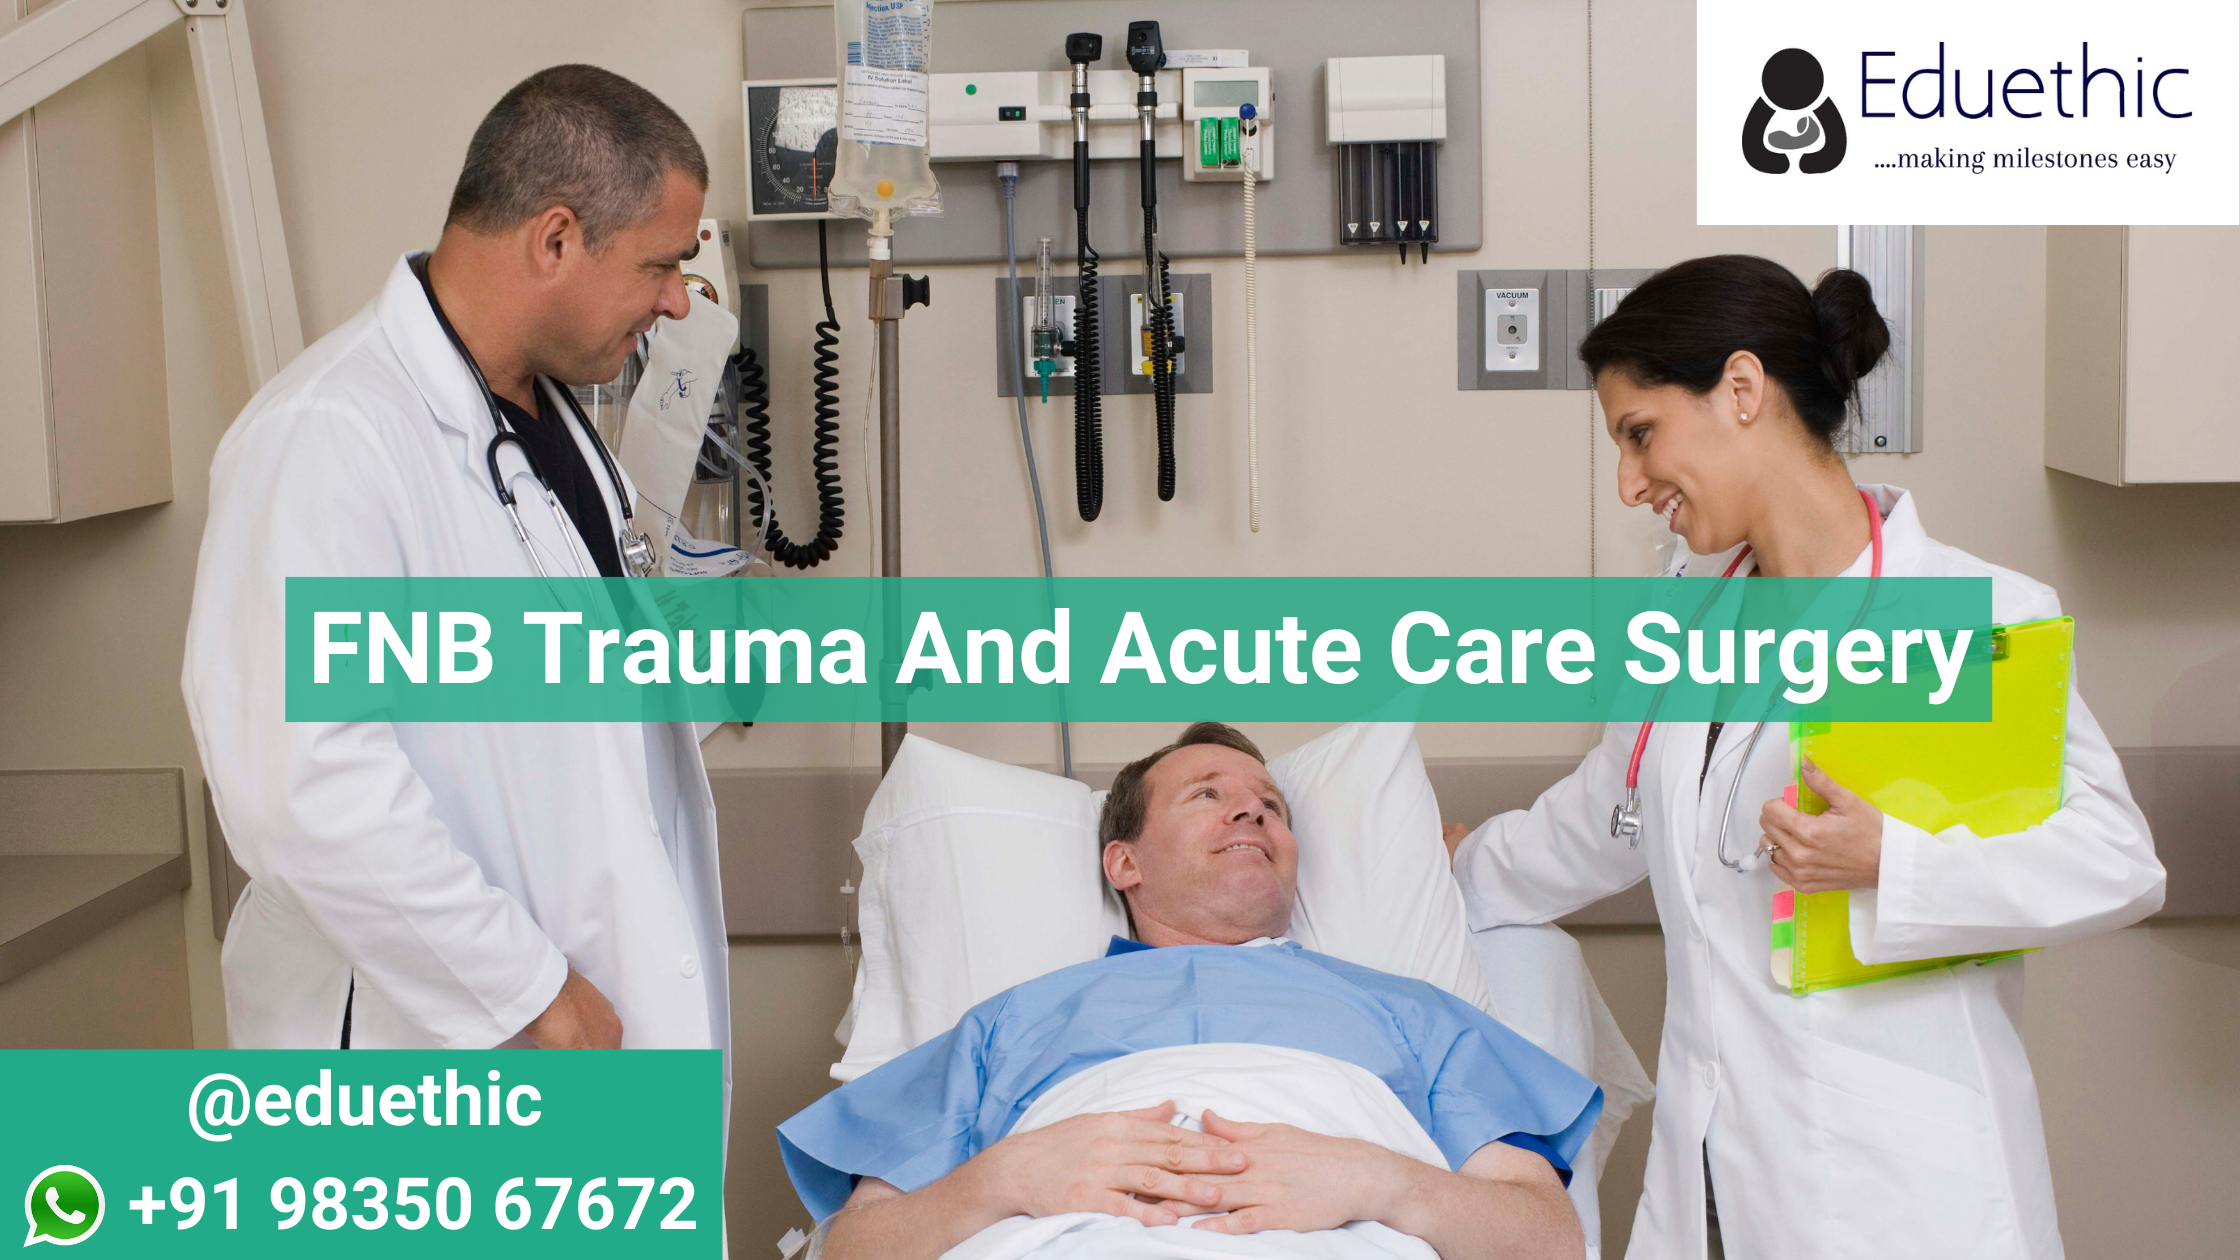 FNB Trauma And Acute Care Surgery: Admissions, Eligibility Criteria Medical Colleges, Fees